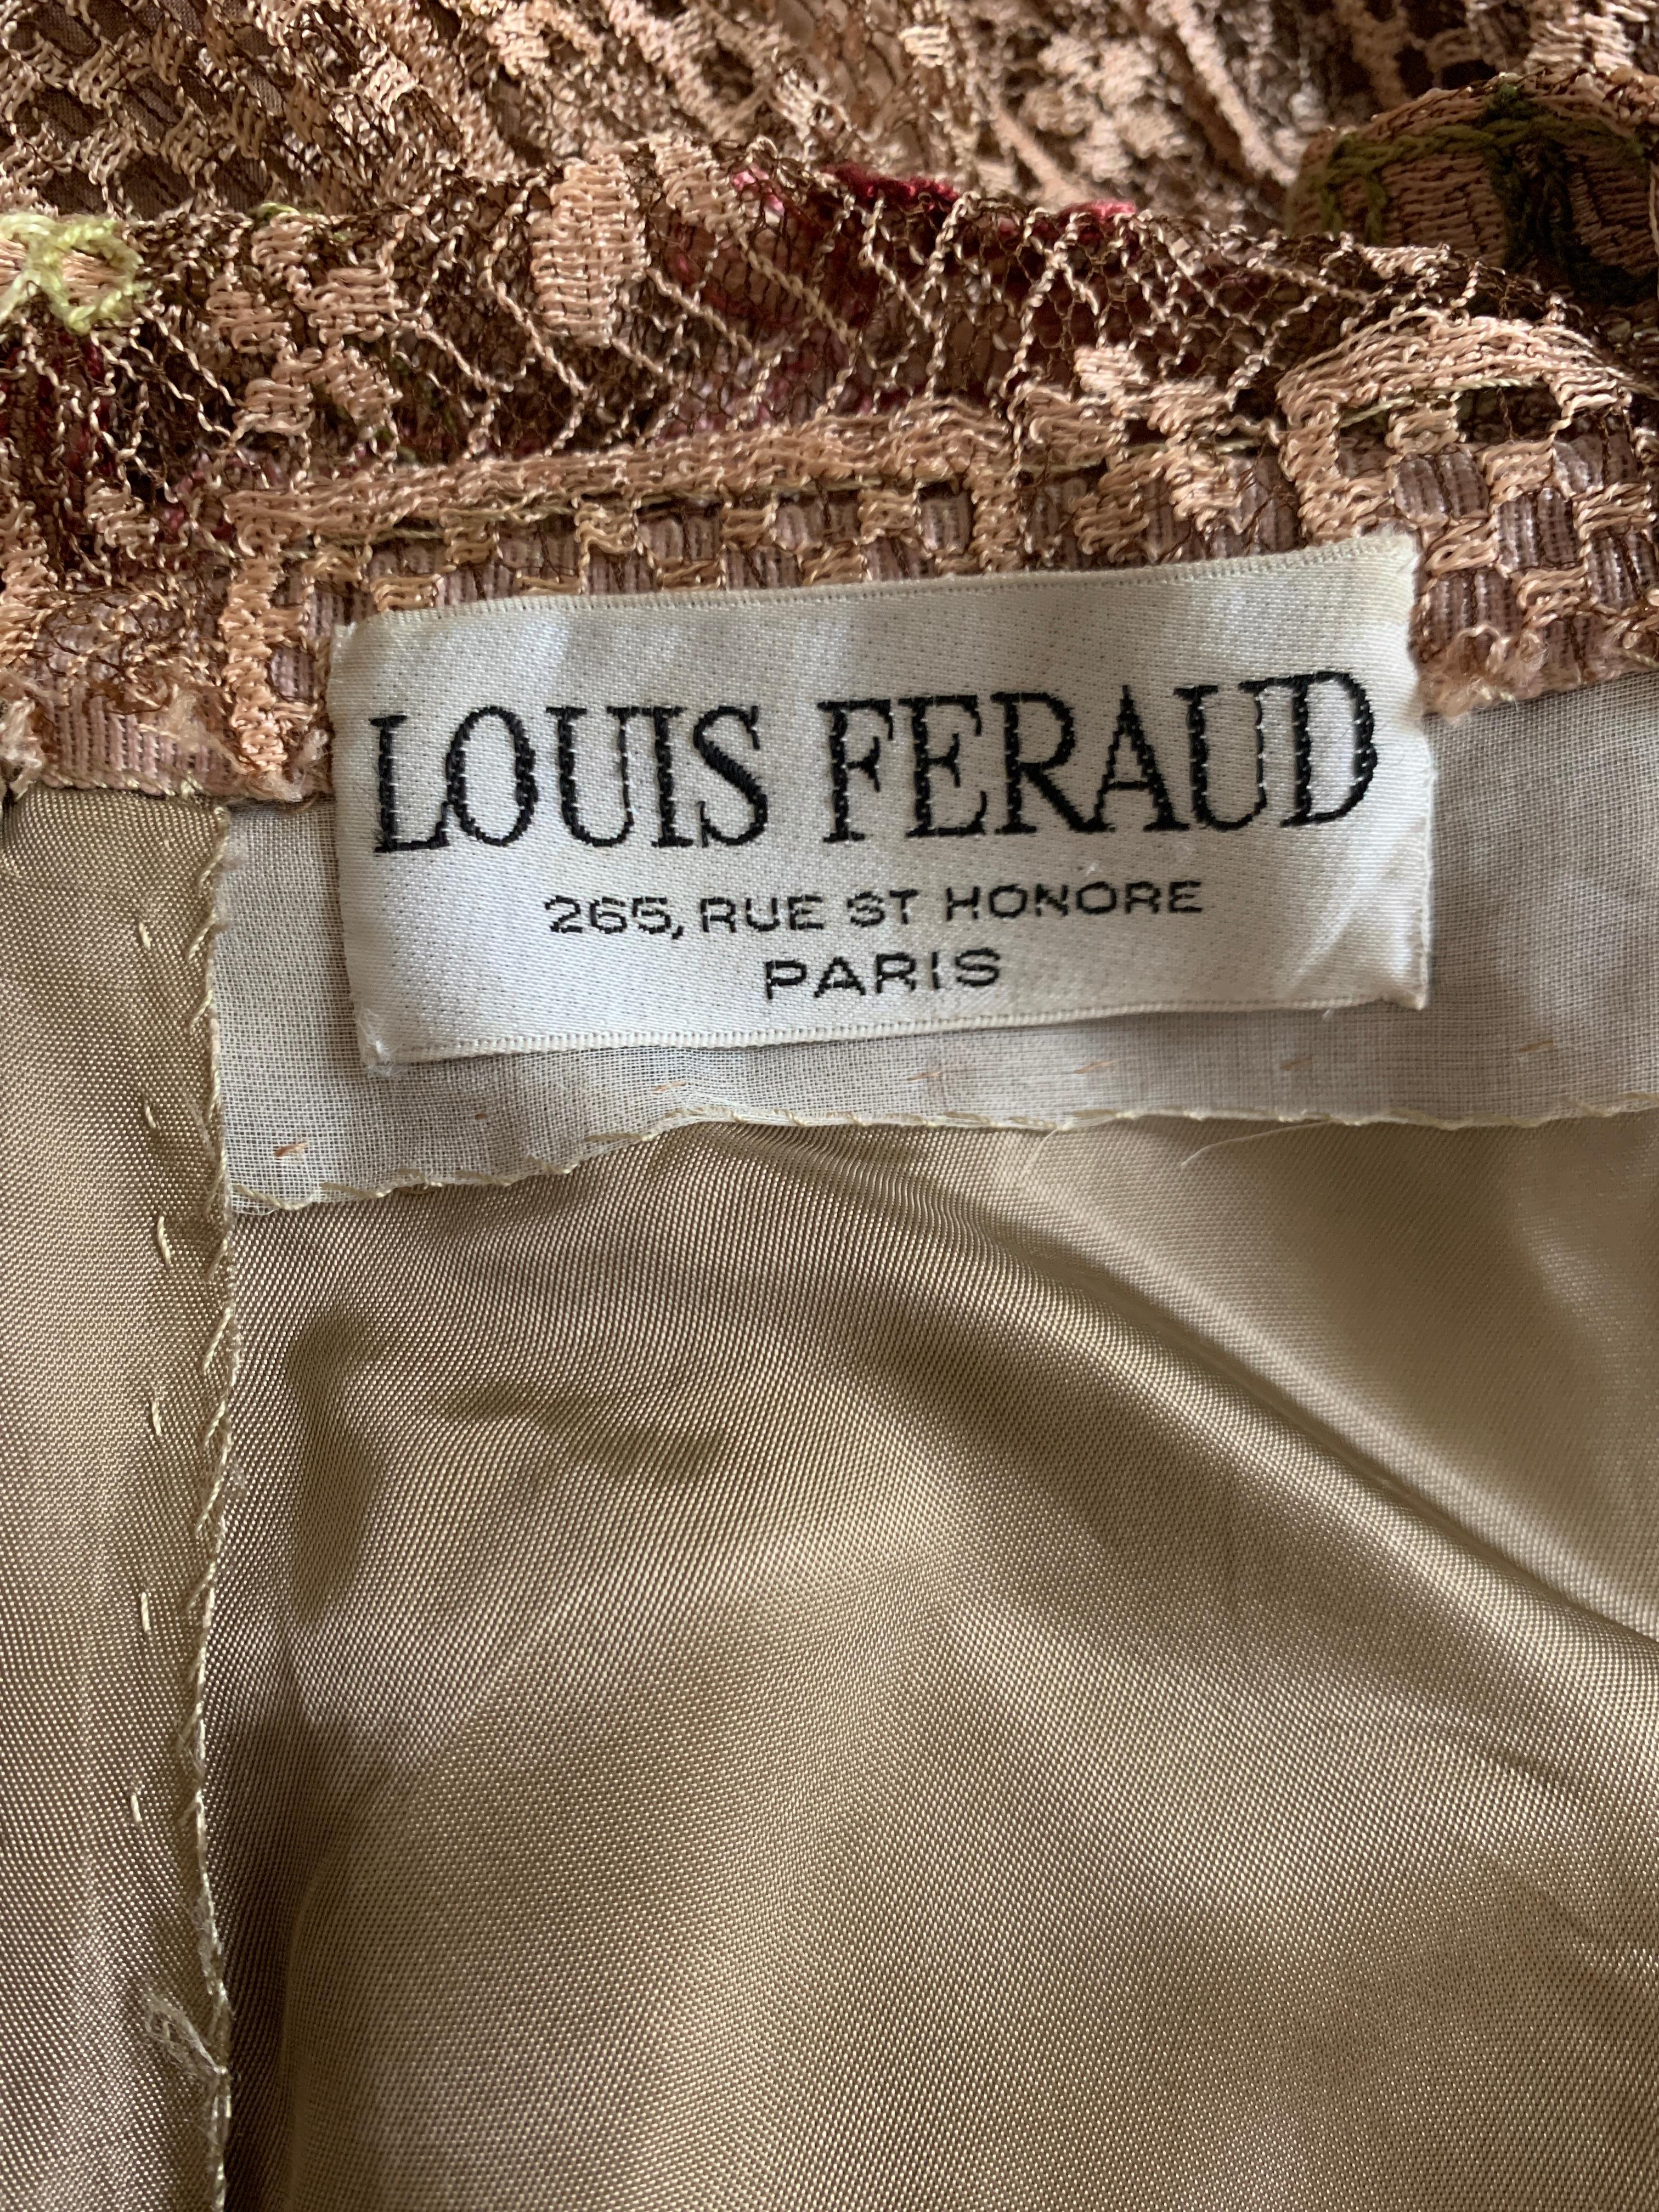 1970s Louis Feraud Couture Tan Lace Floral Embroidered Dress  For Sale 4